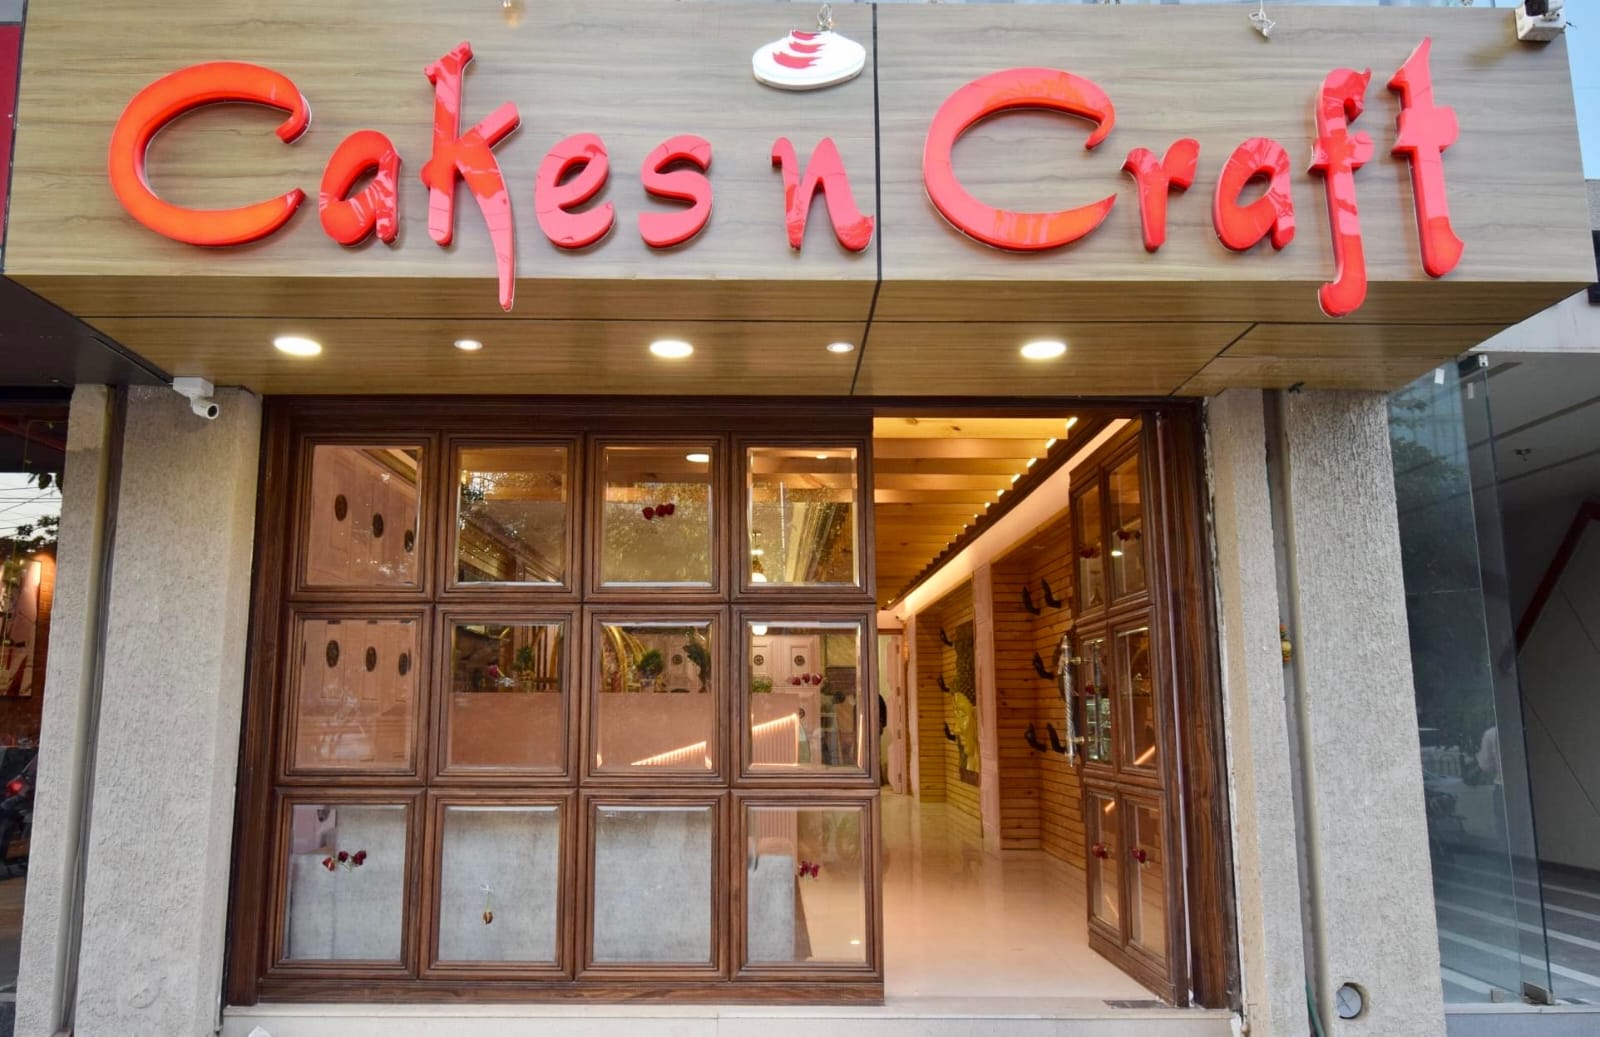 Find list of Cakes N Craft in Sapna Sangeeta Road, Indore - Justdial